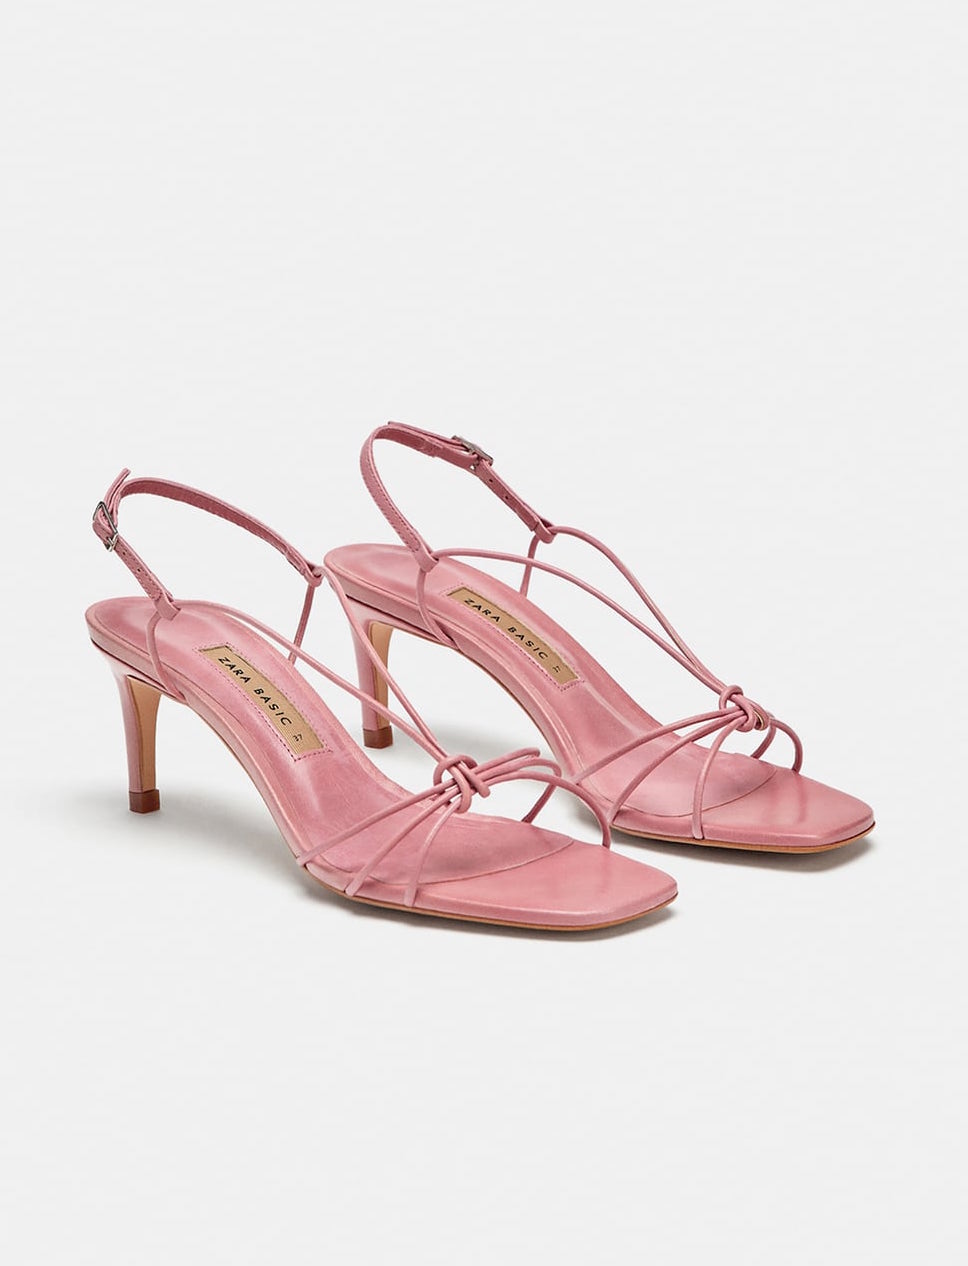 Shoes High-Heeled Sandals Strapped High-Heeled Sandals Zara Basic Strapped High-Heeled Sandals pink casual look 